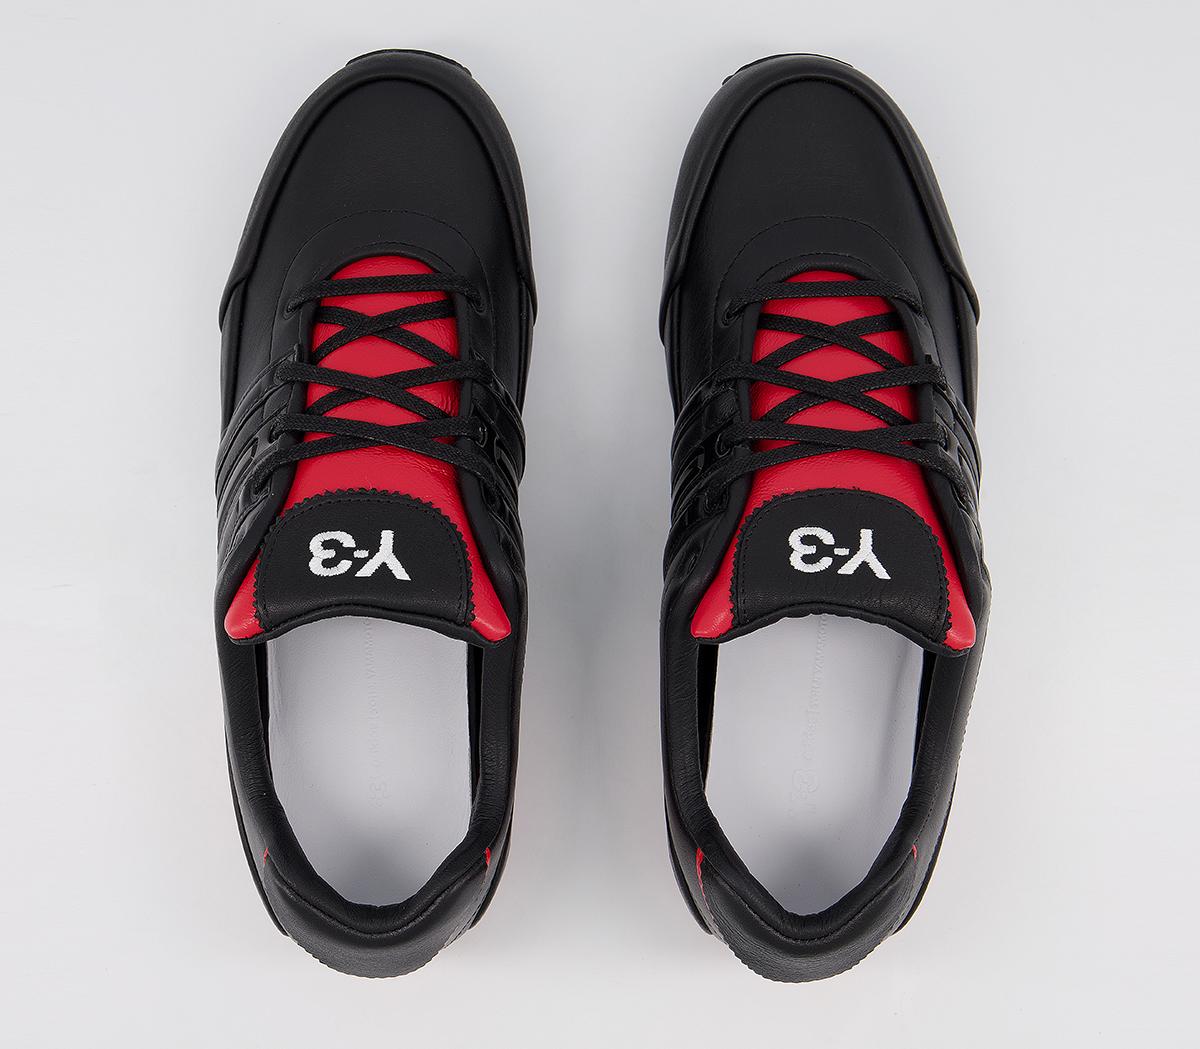 adidas Y3 Y-3 Sprint Trainers Black Red - His trainers